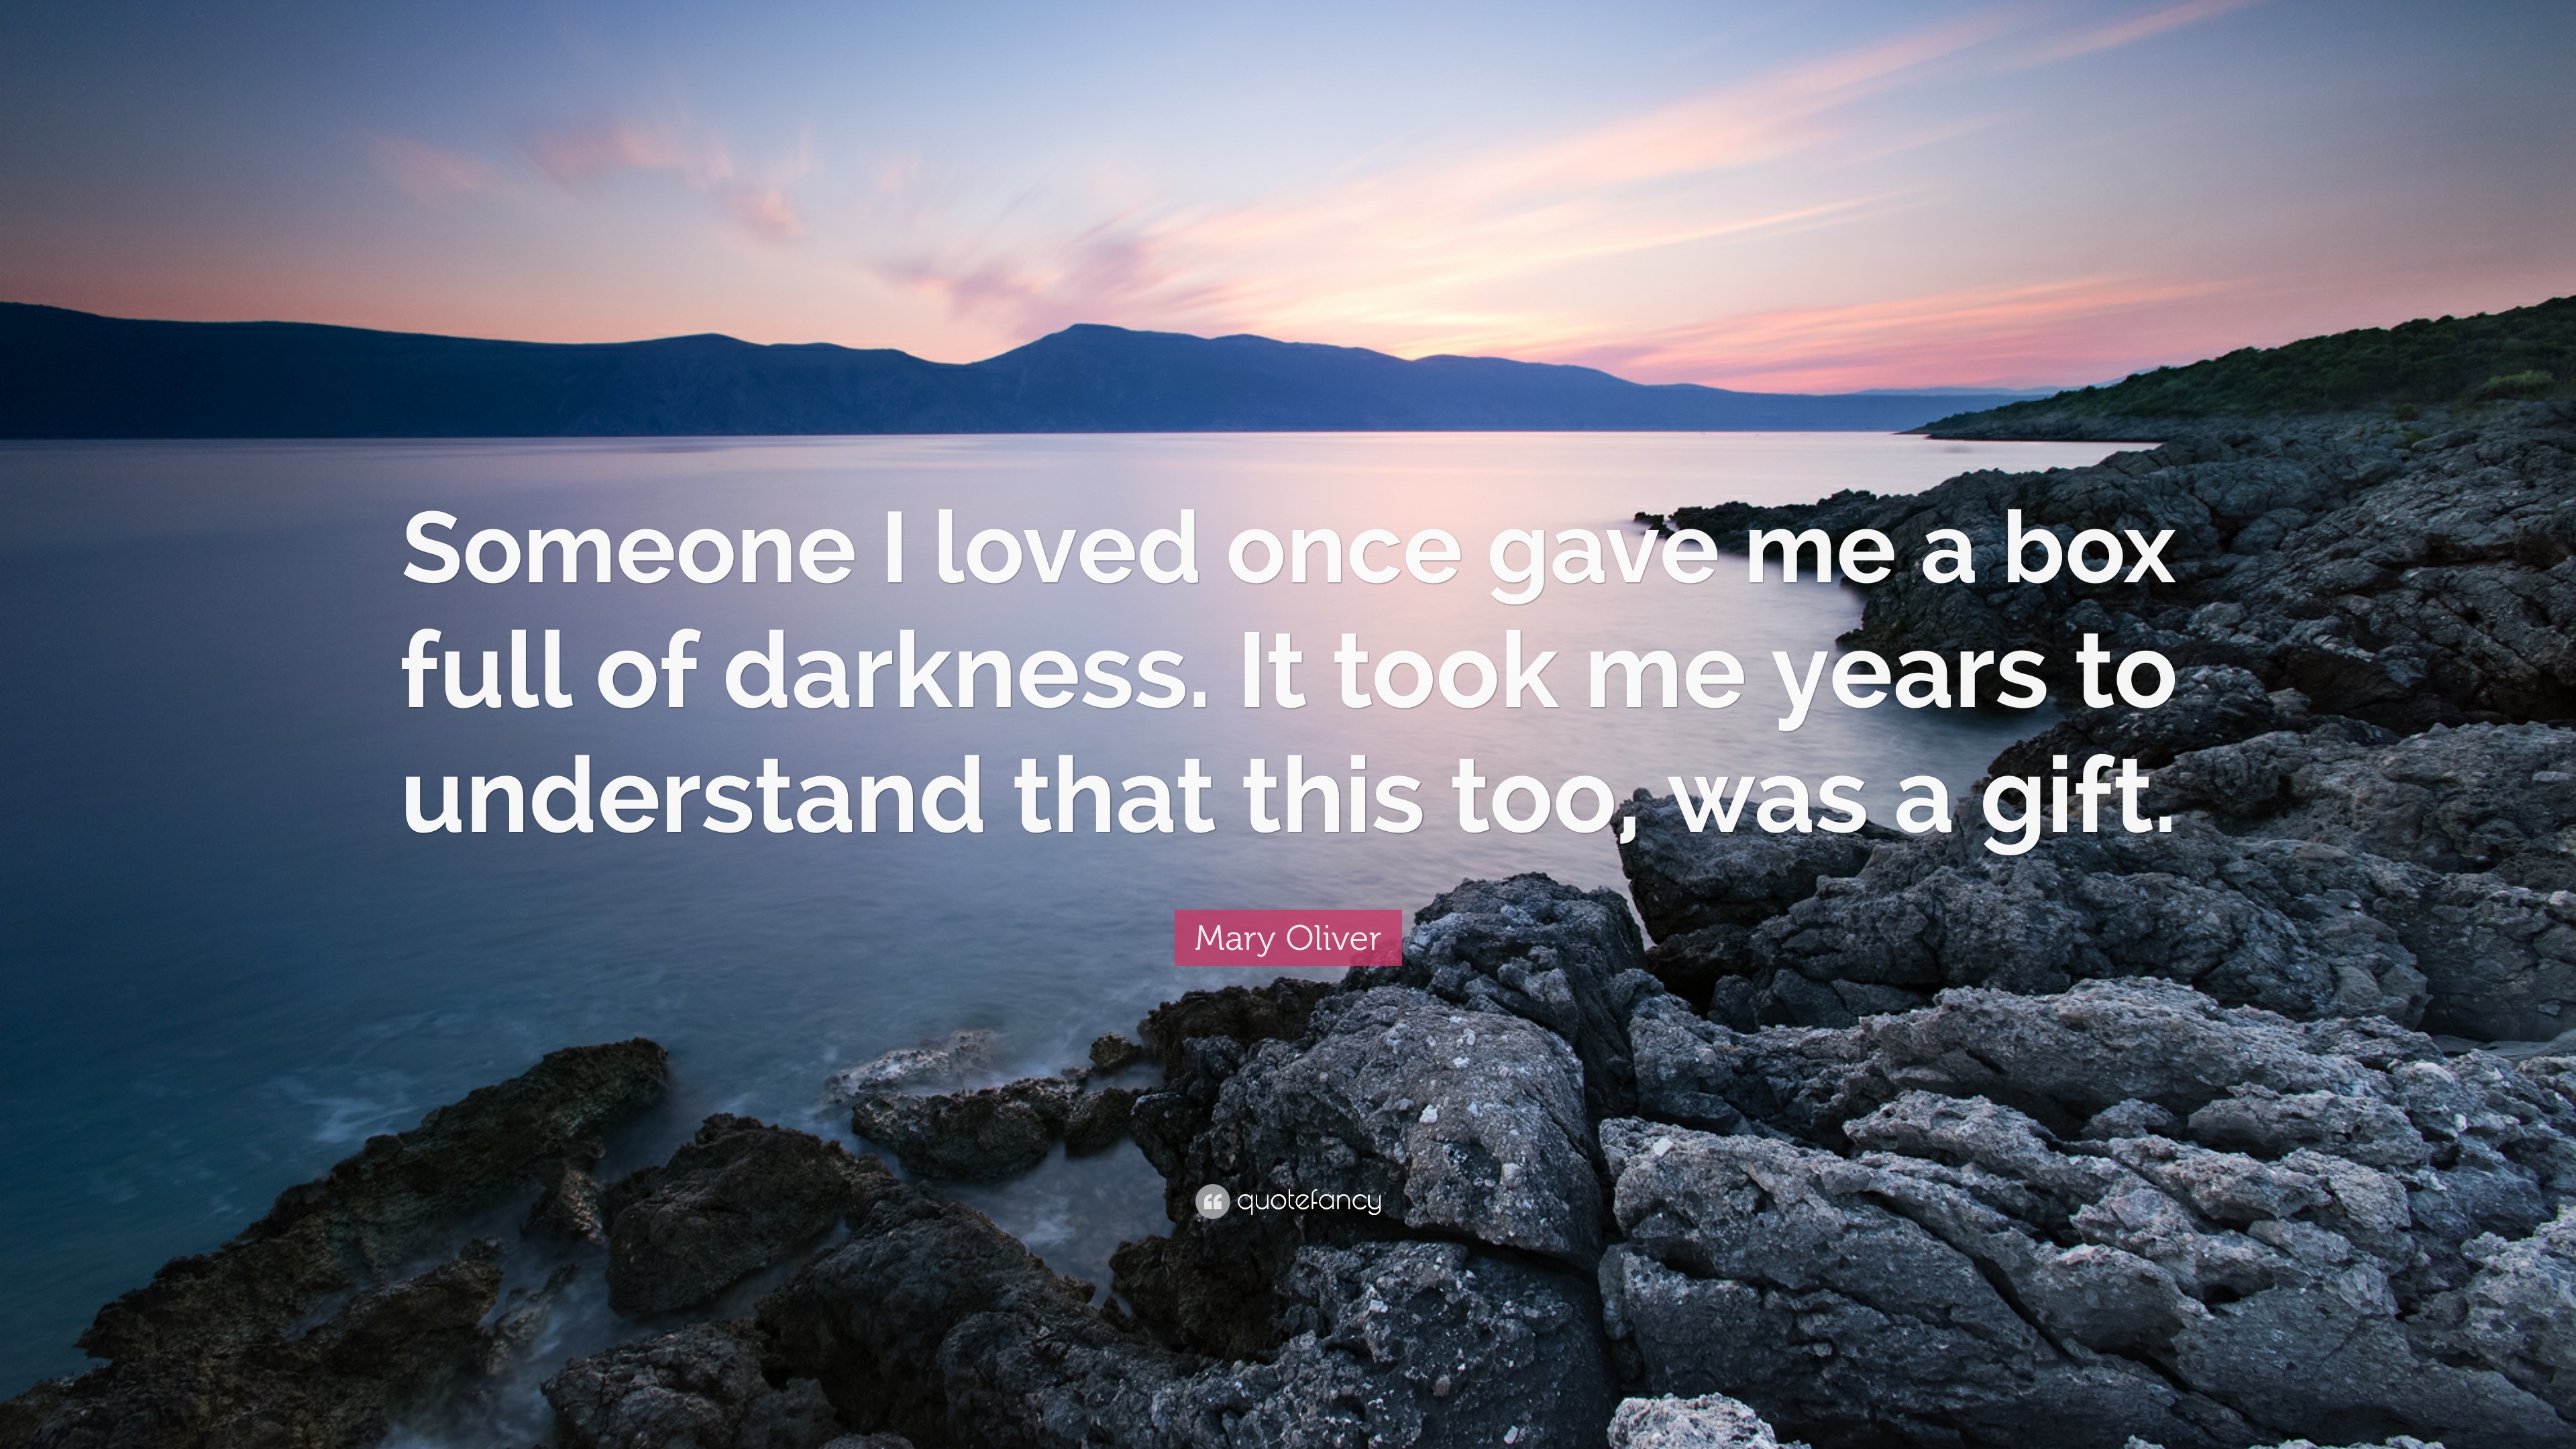 Mary Oliver Quote “someone I Loved Once Gave Me A Box Full Of Darkness